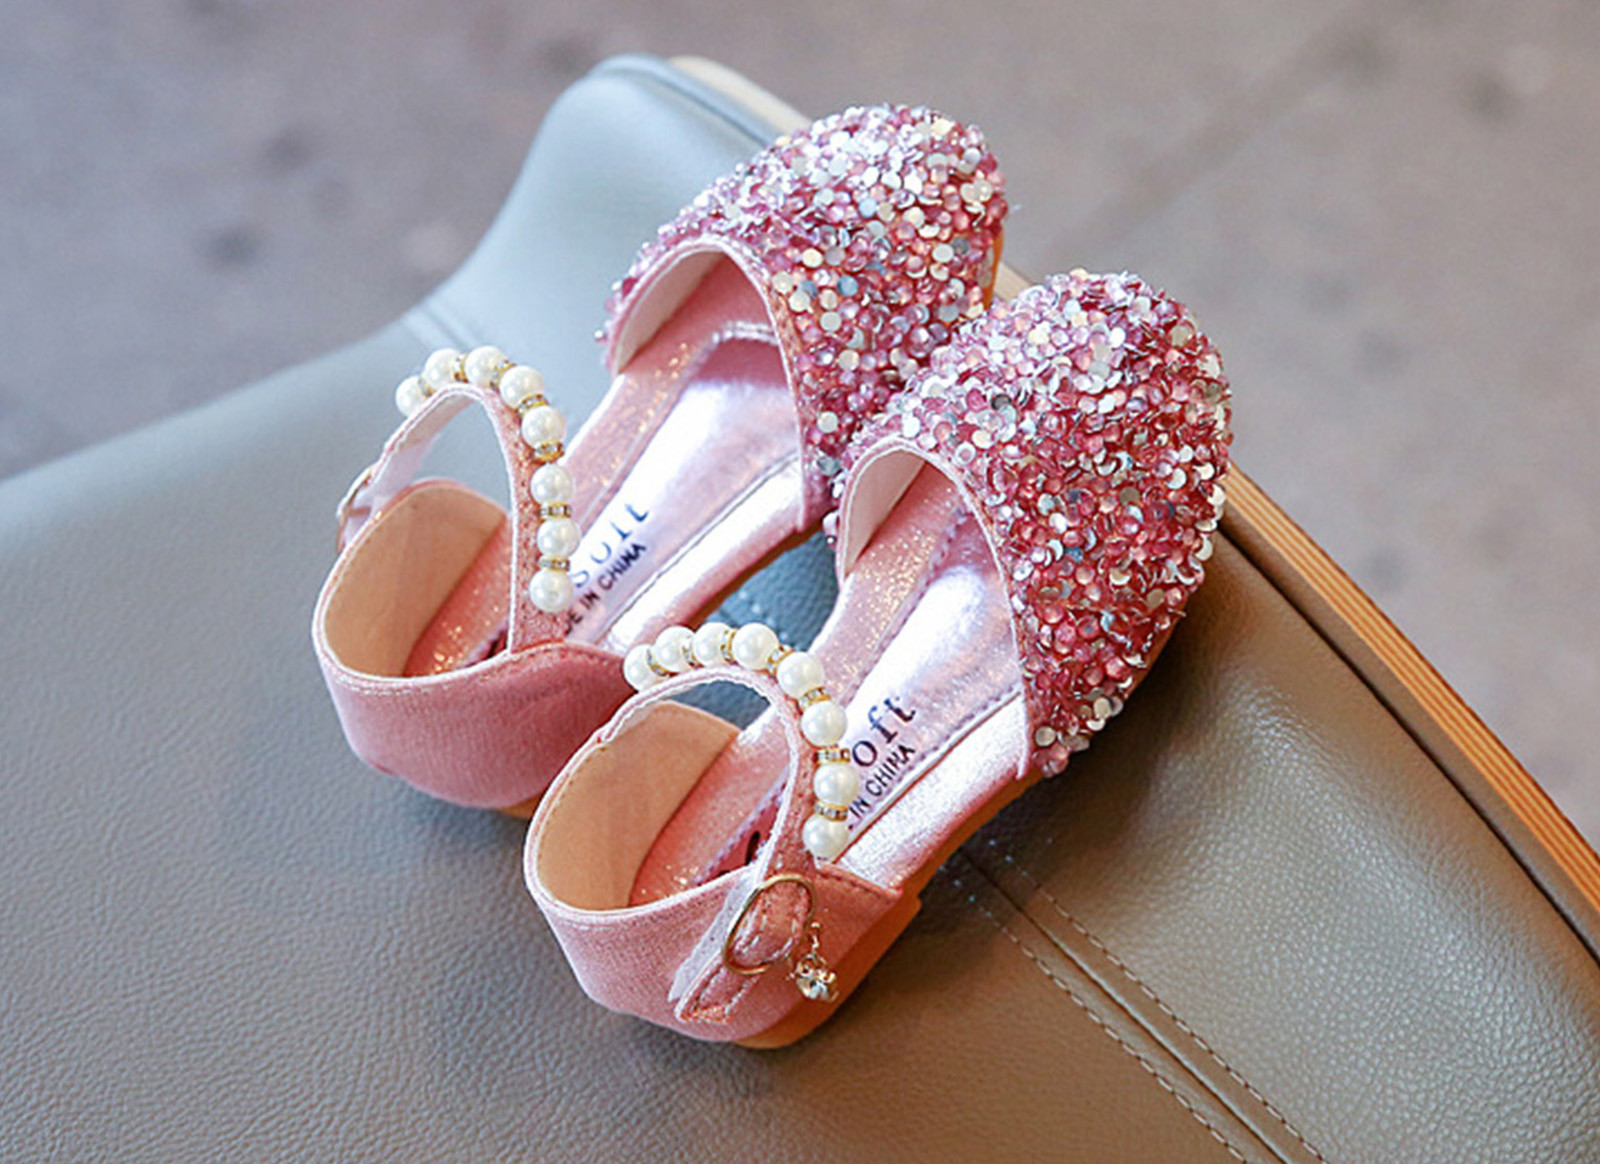 Cathalem Toddler Water Sandals Princess Pumps Dance Shoes Low Heels Rhinestone Sequins Girls Glitter Toddler Girls Jelly Sandals Sandal Pink 18 Months - image 1 of 4